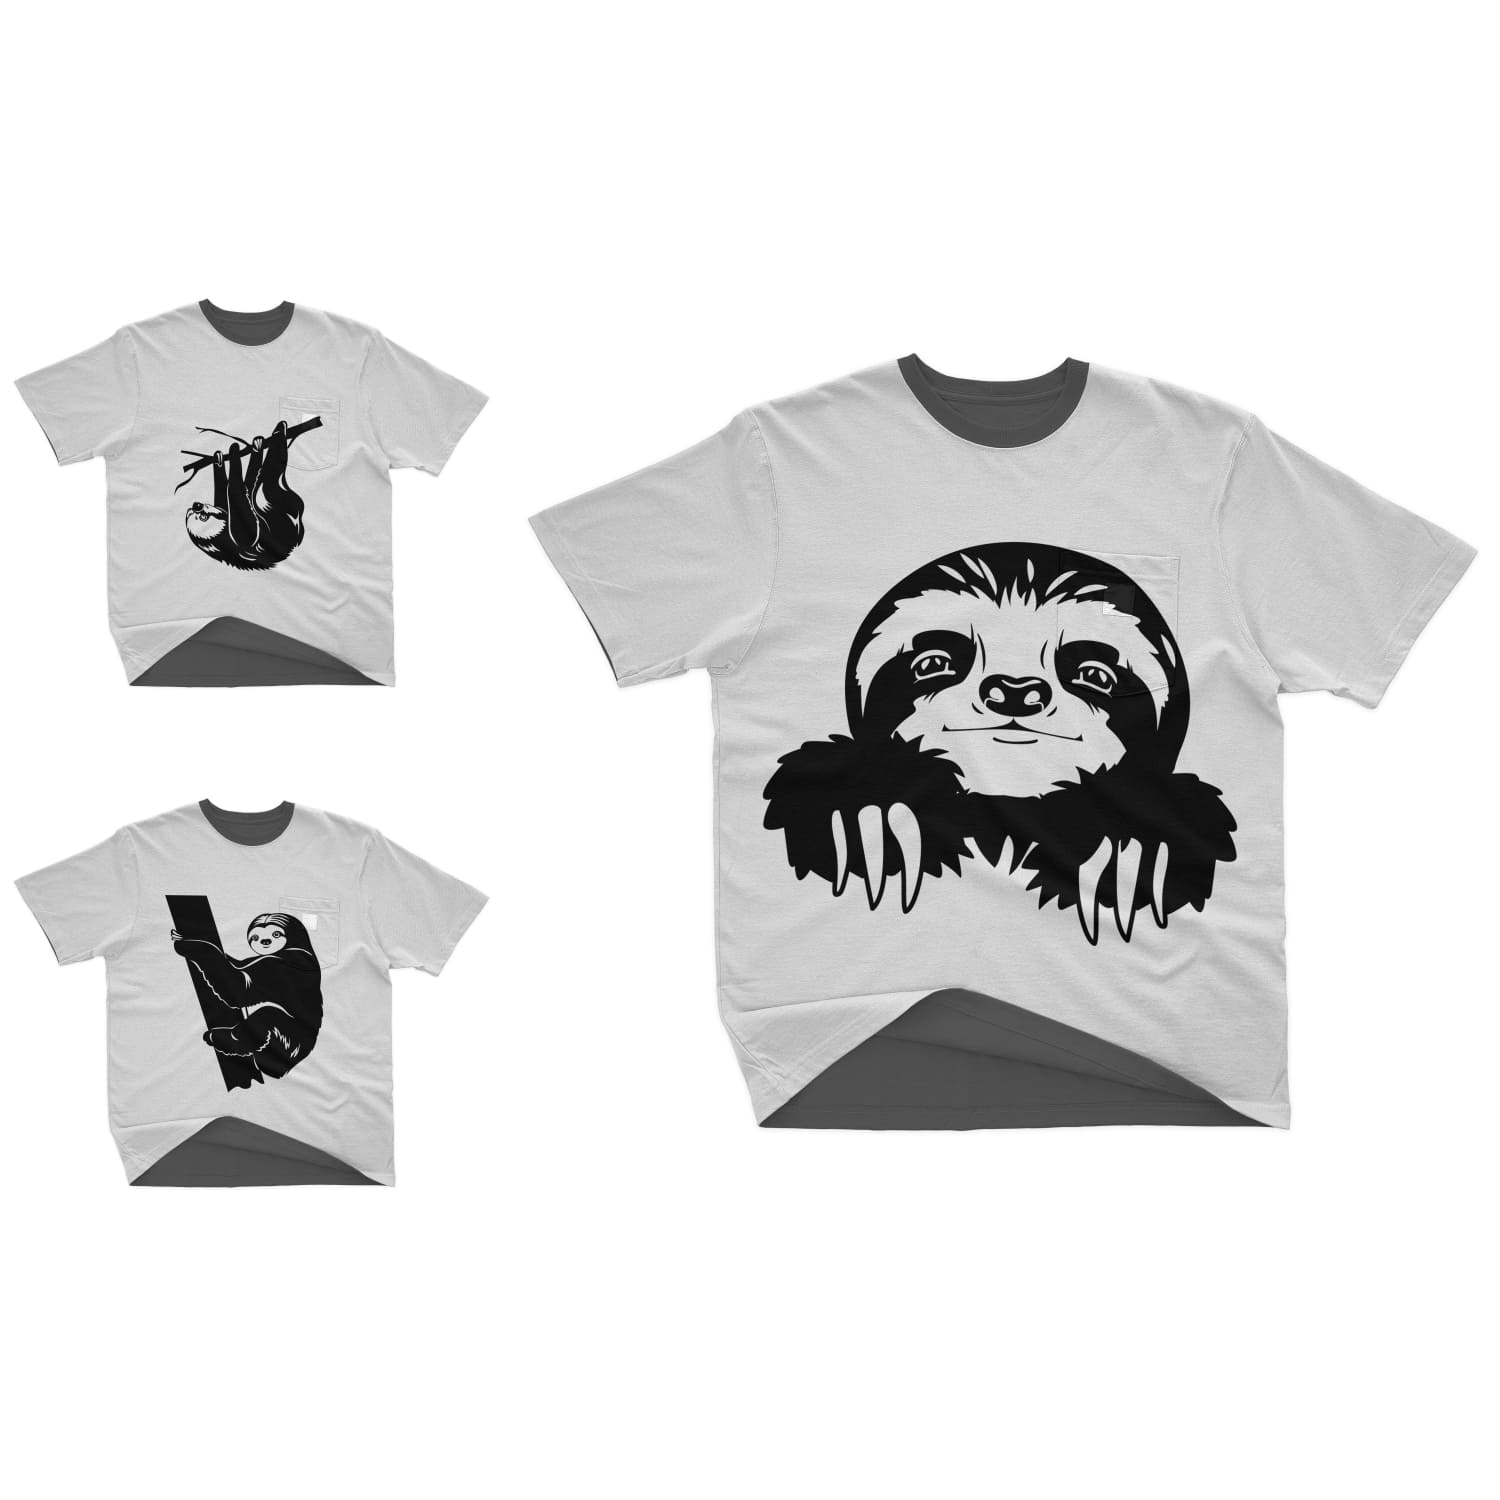 A set of white t-shirts with an adorable sloth silhouette print.